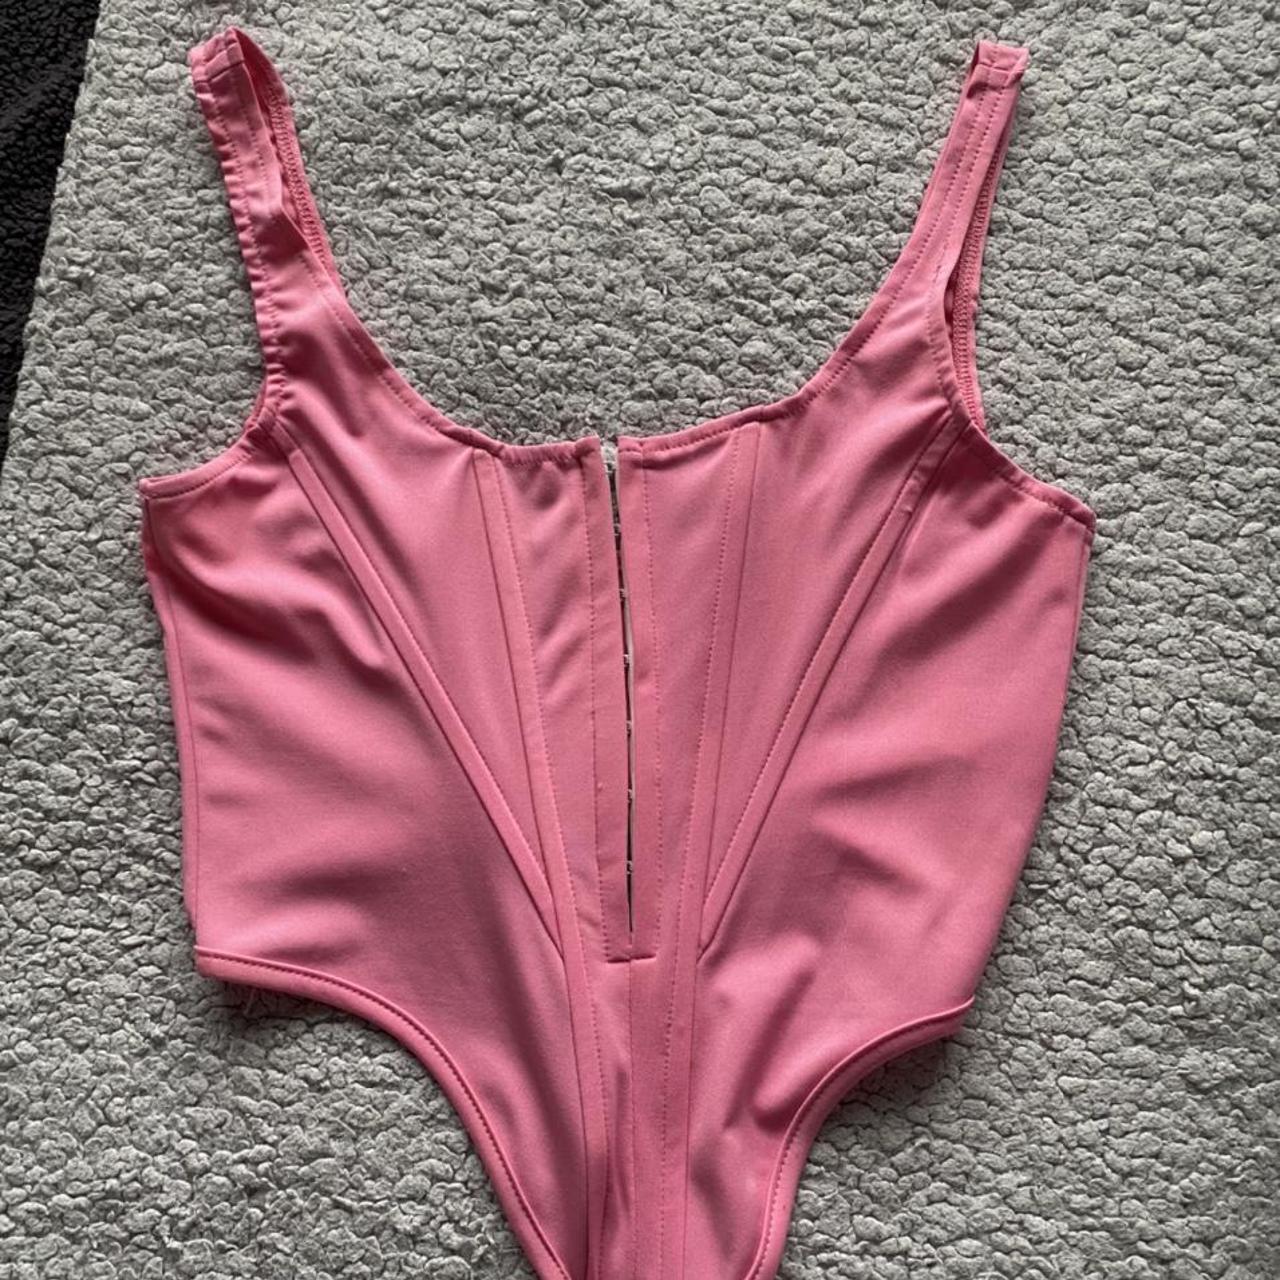 Gorgeous hot pink corset top. Bought for Halloween - Depop